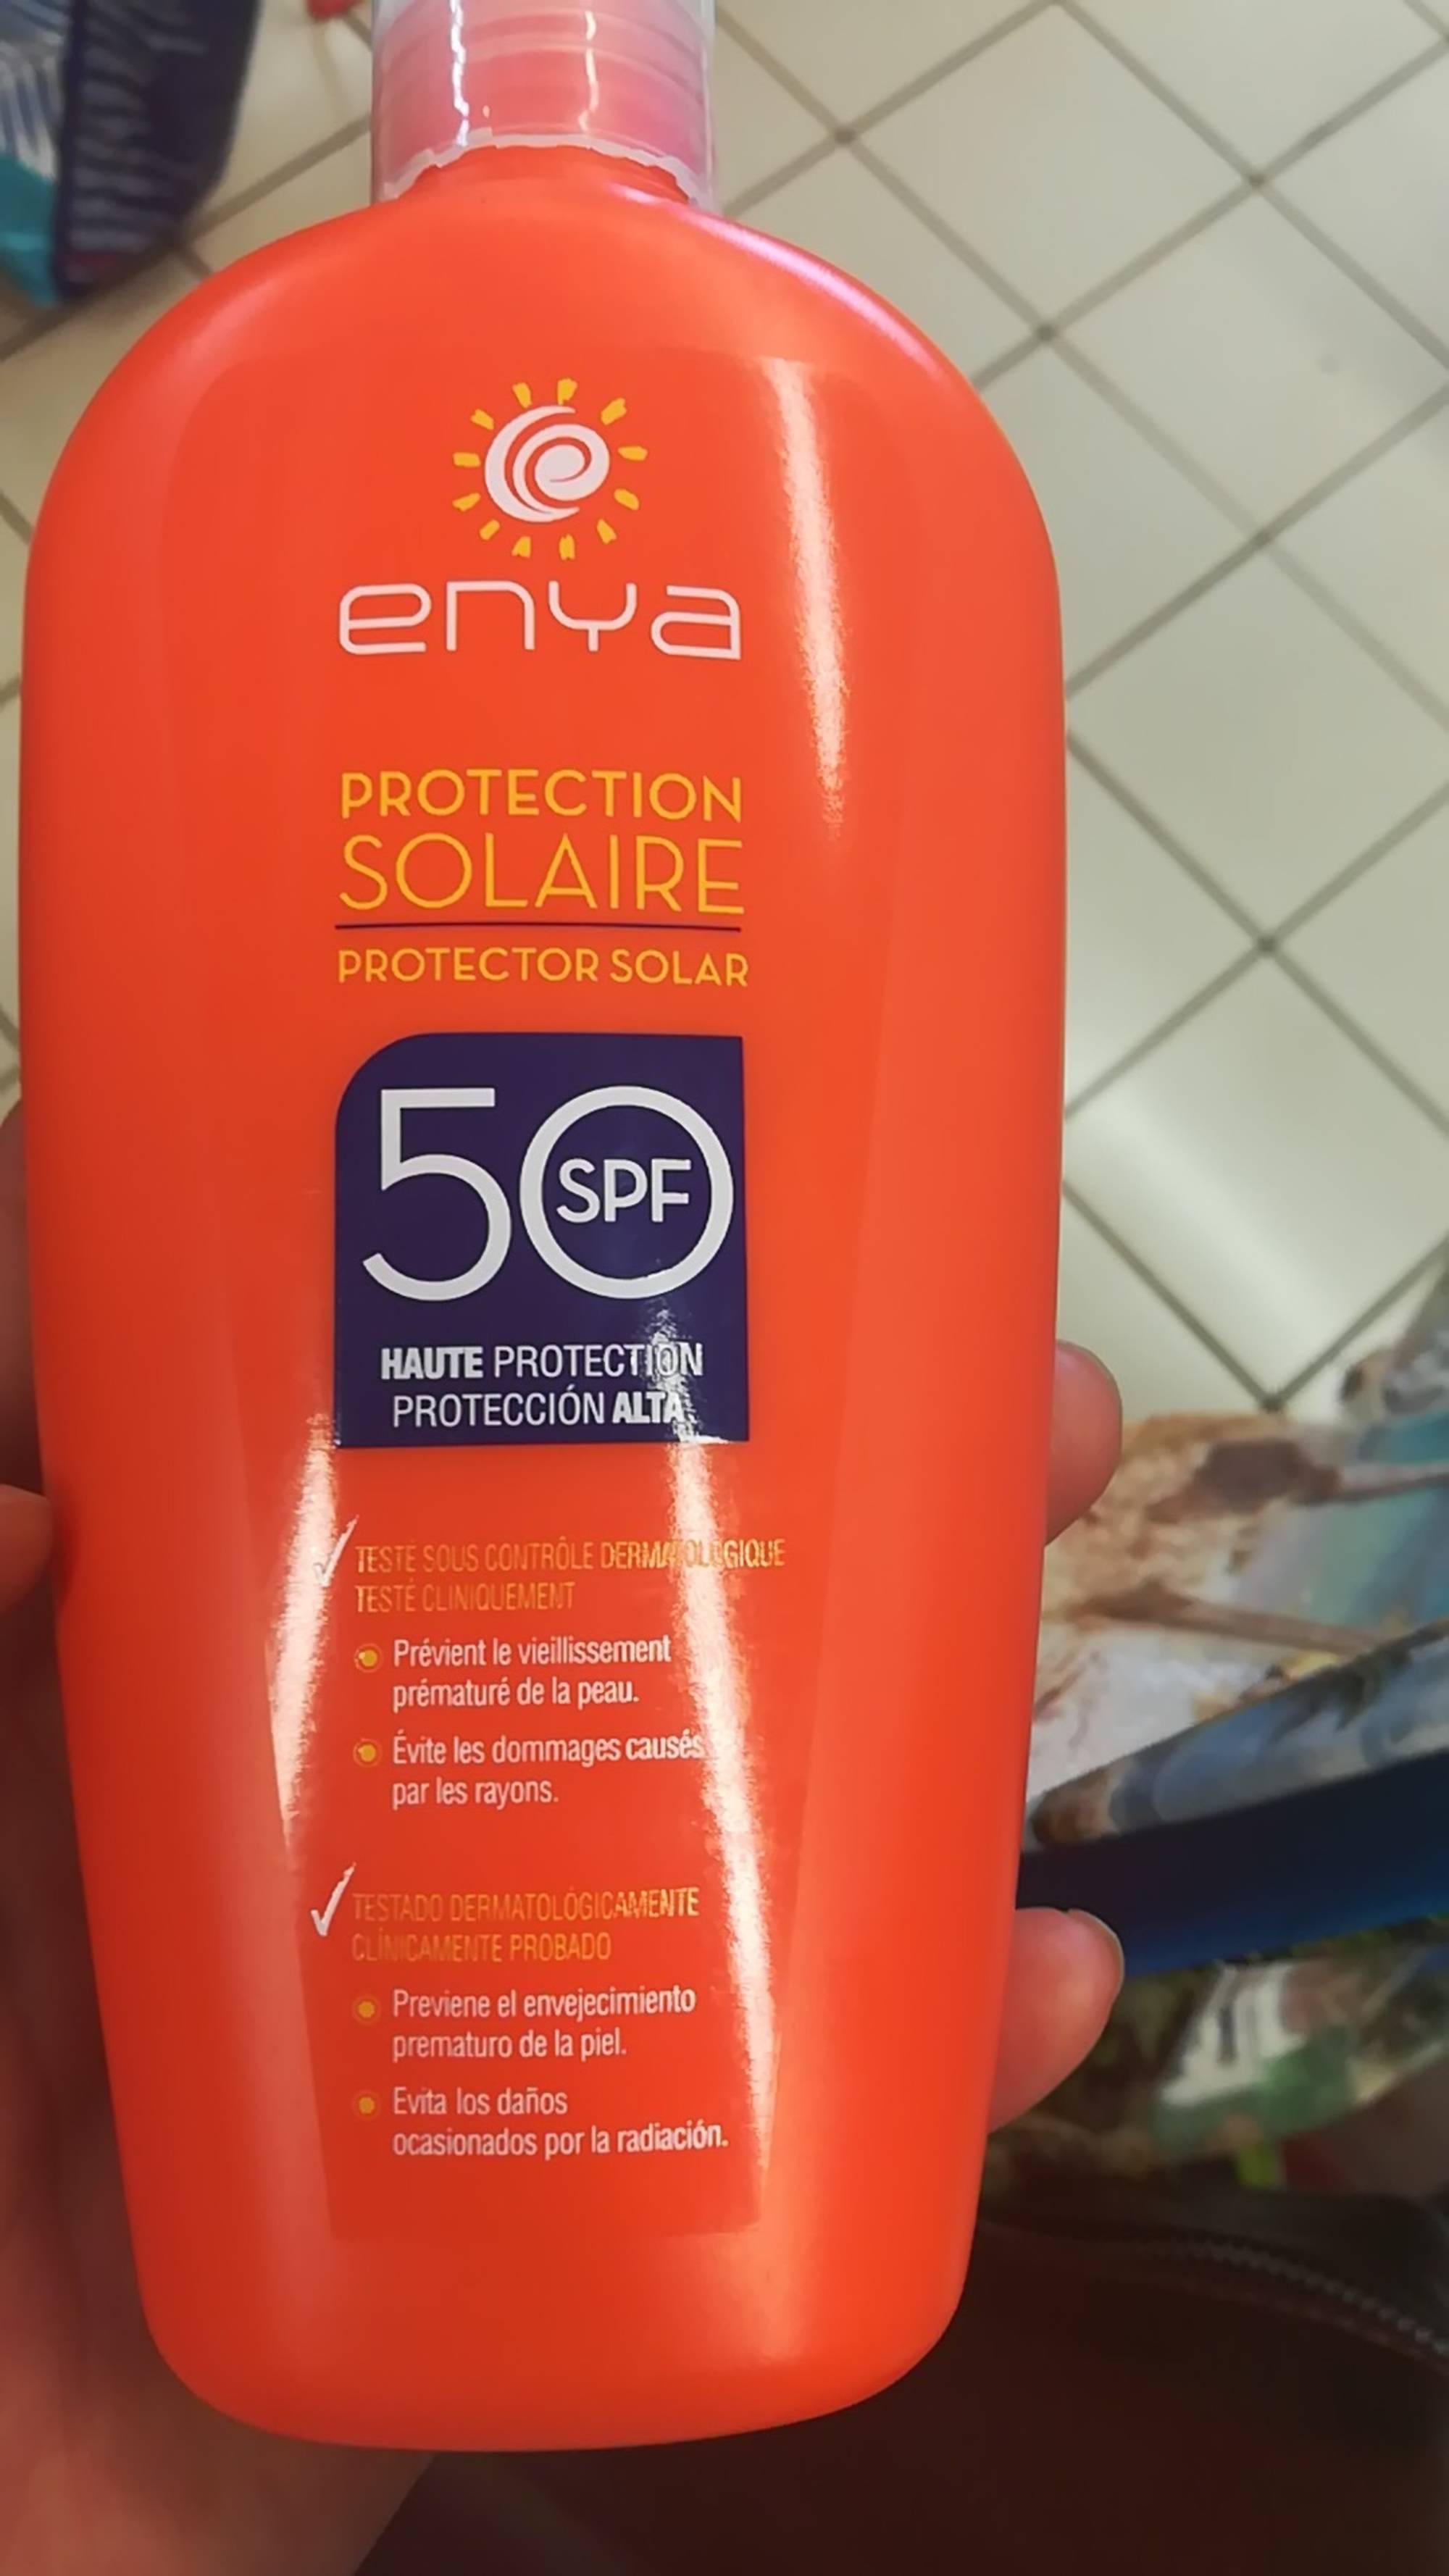 ENYA - Protection solaire SPF 50